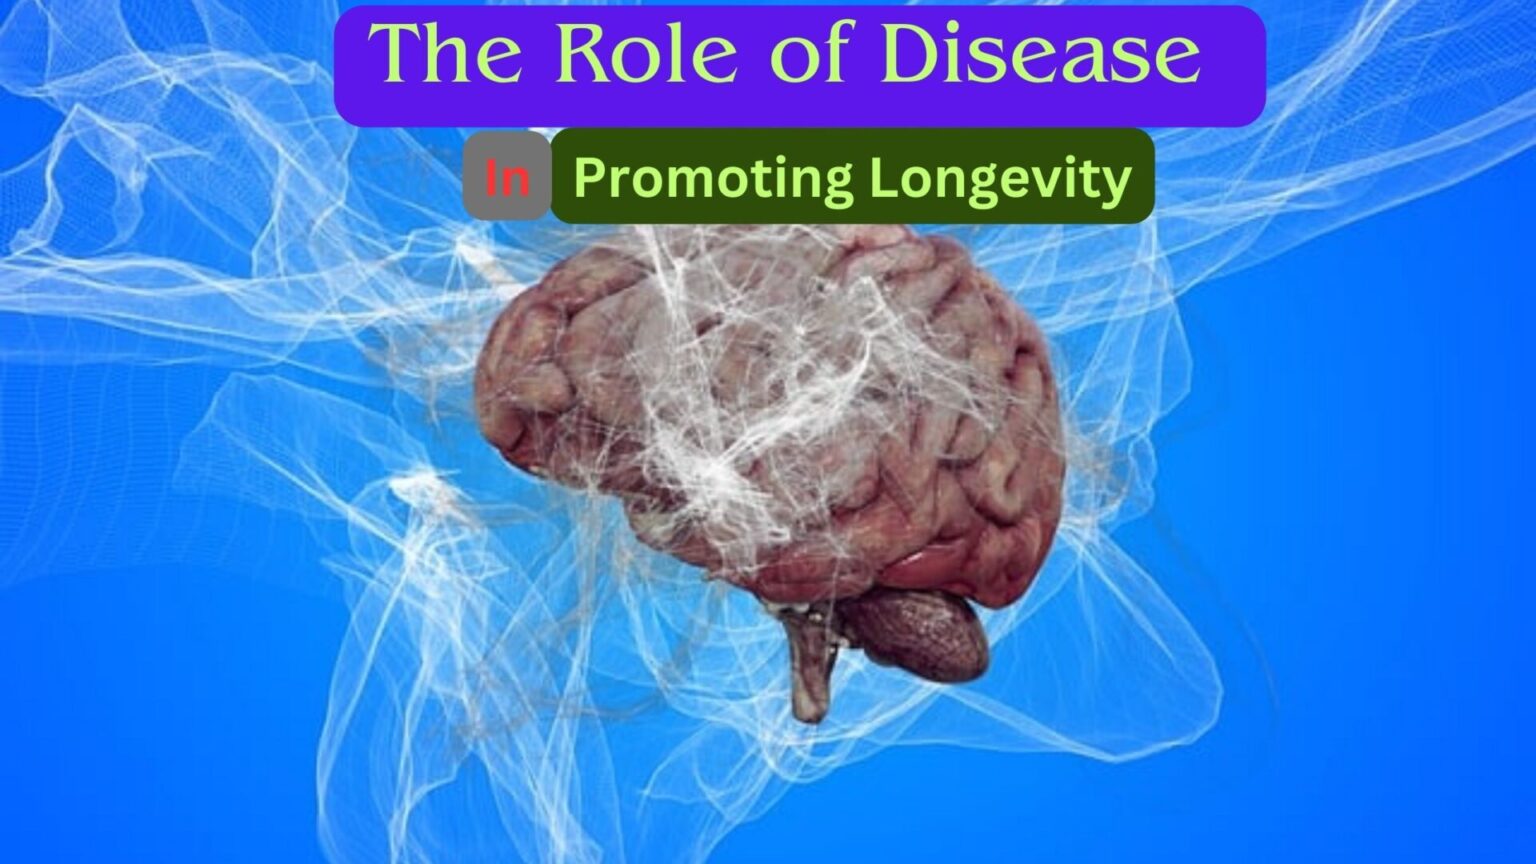 The Role of Disease in Promoting Longevity